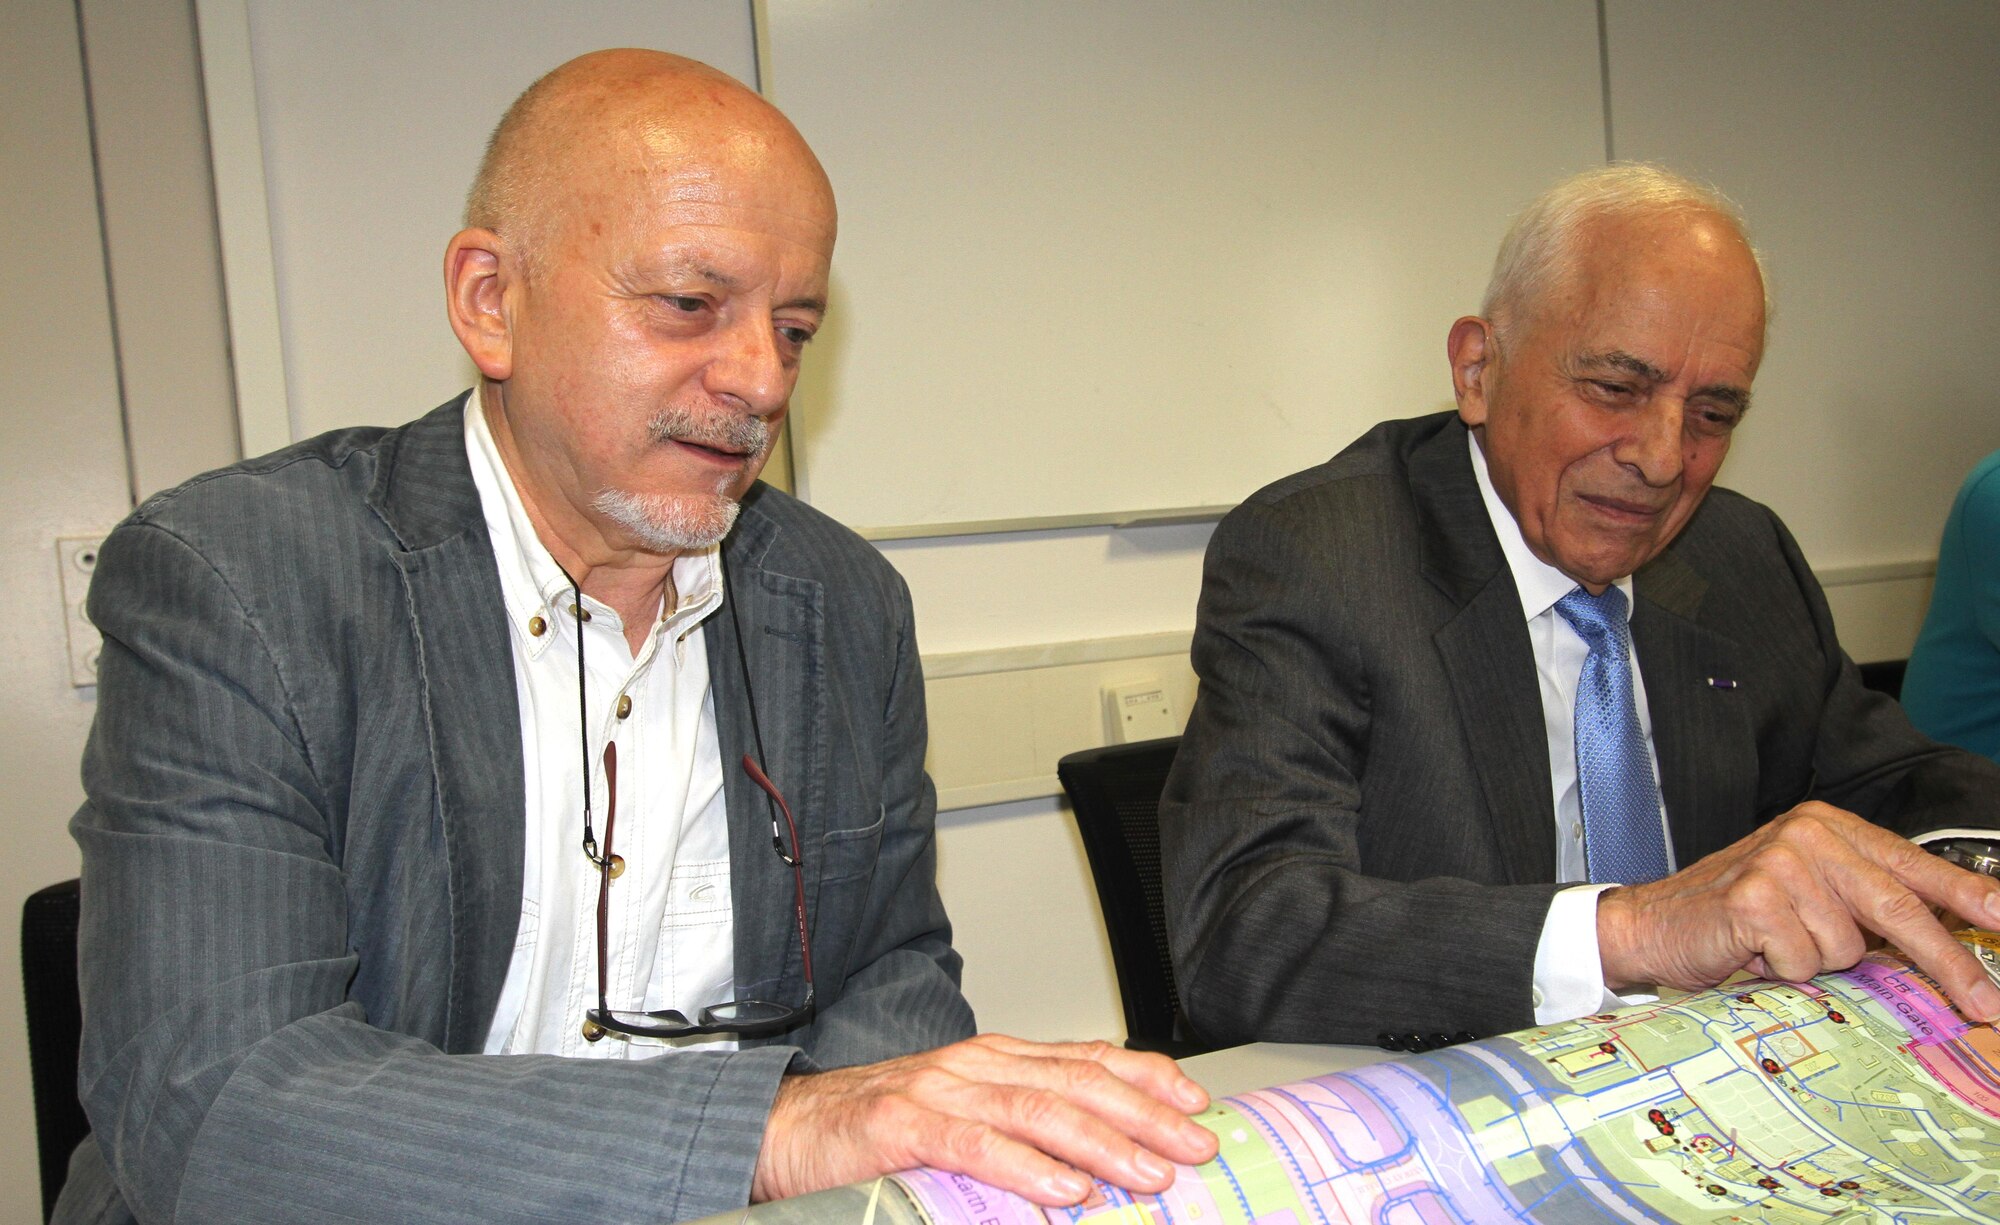 At left, Karl Willi Ningelgen, AFCEC's Europe senior environmental advisor, and his coworker Tony Duno look over a base map during a meeting at Ramstein AB, Germany. (U.S. Air Force photo/Debbie Aragon)